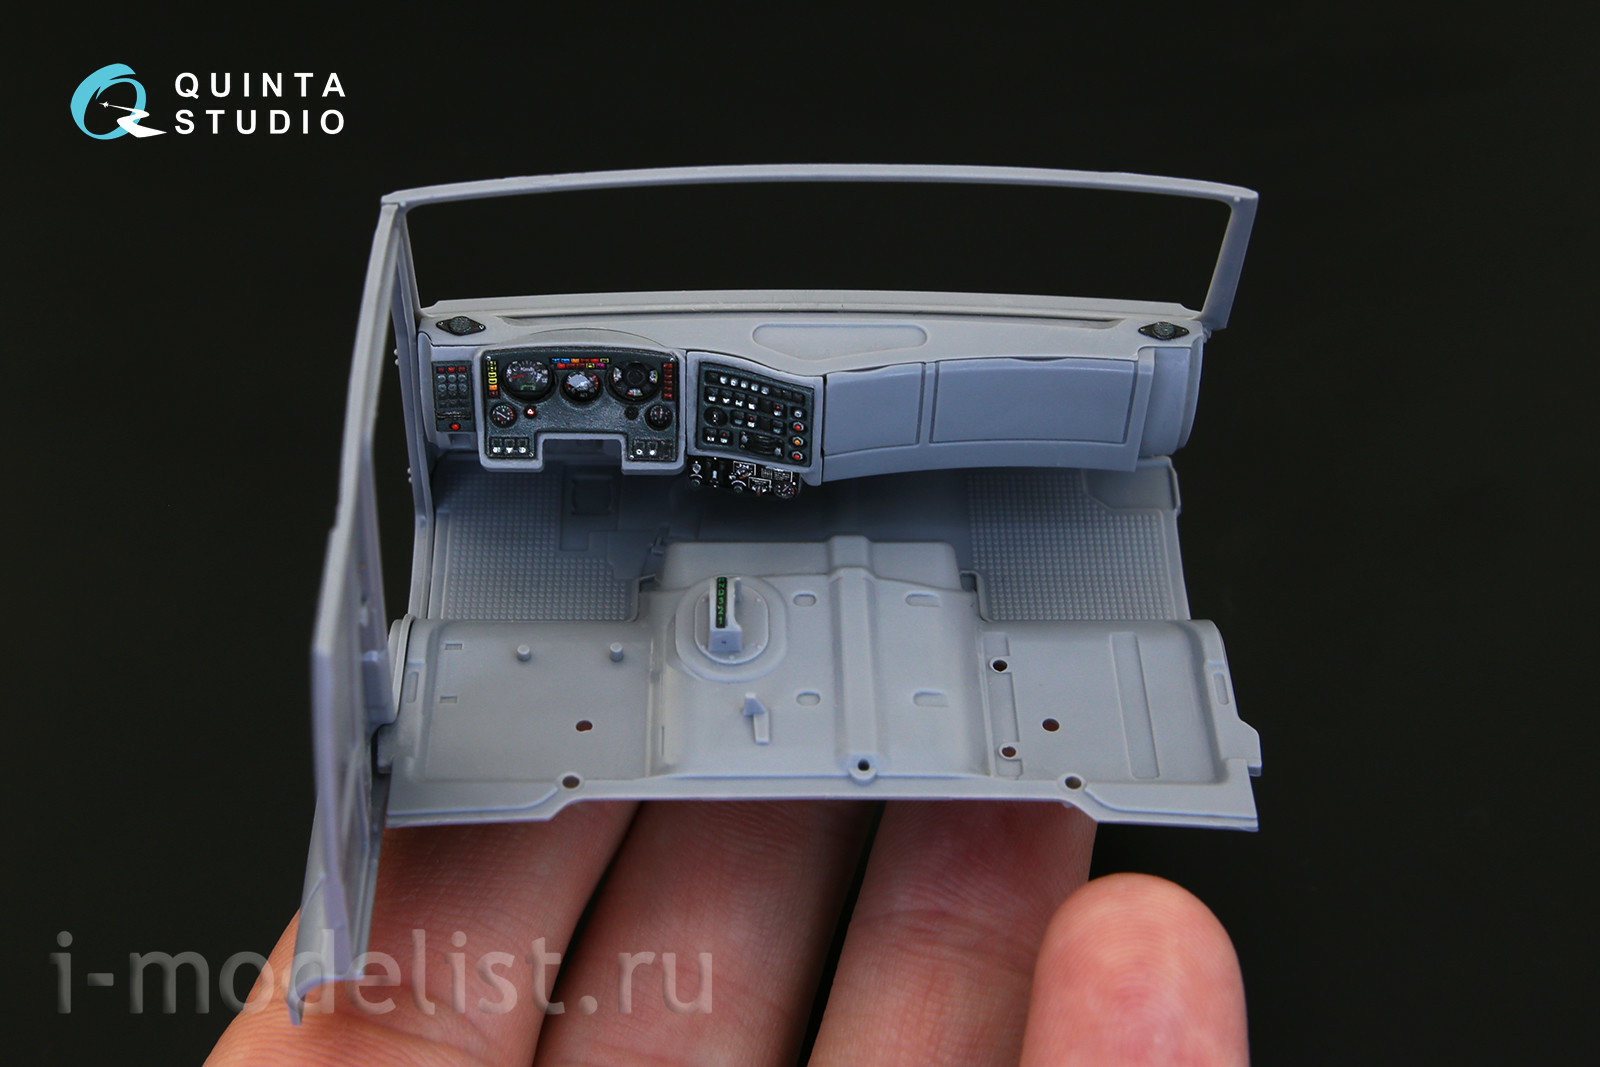 QD35014 Quinta Studio 1/35 3D Cabin Interior Decal for KFZ 251 Ausf.A (for the ICM model)